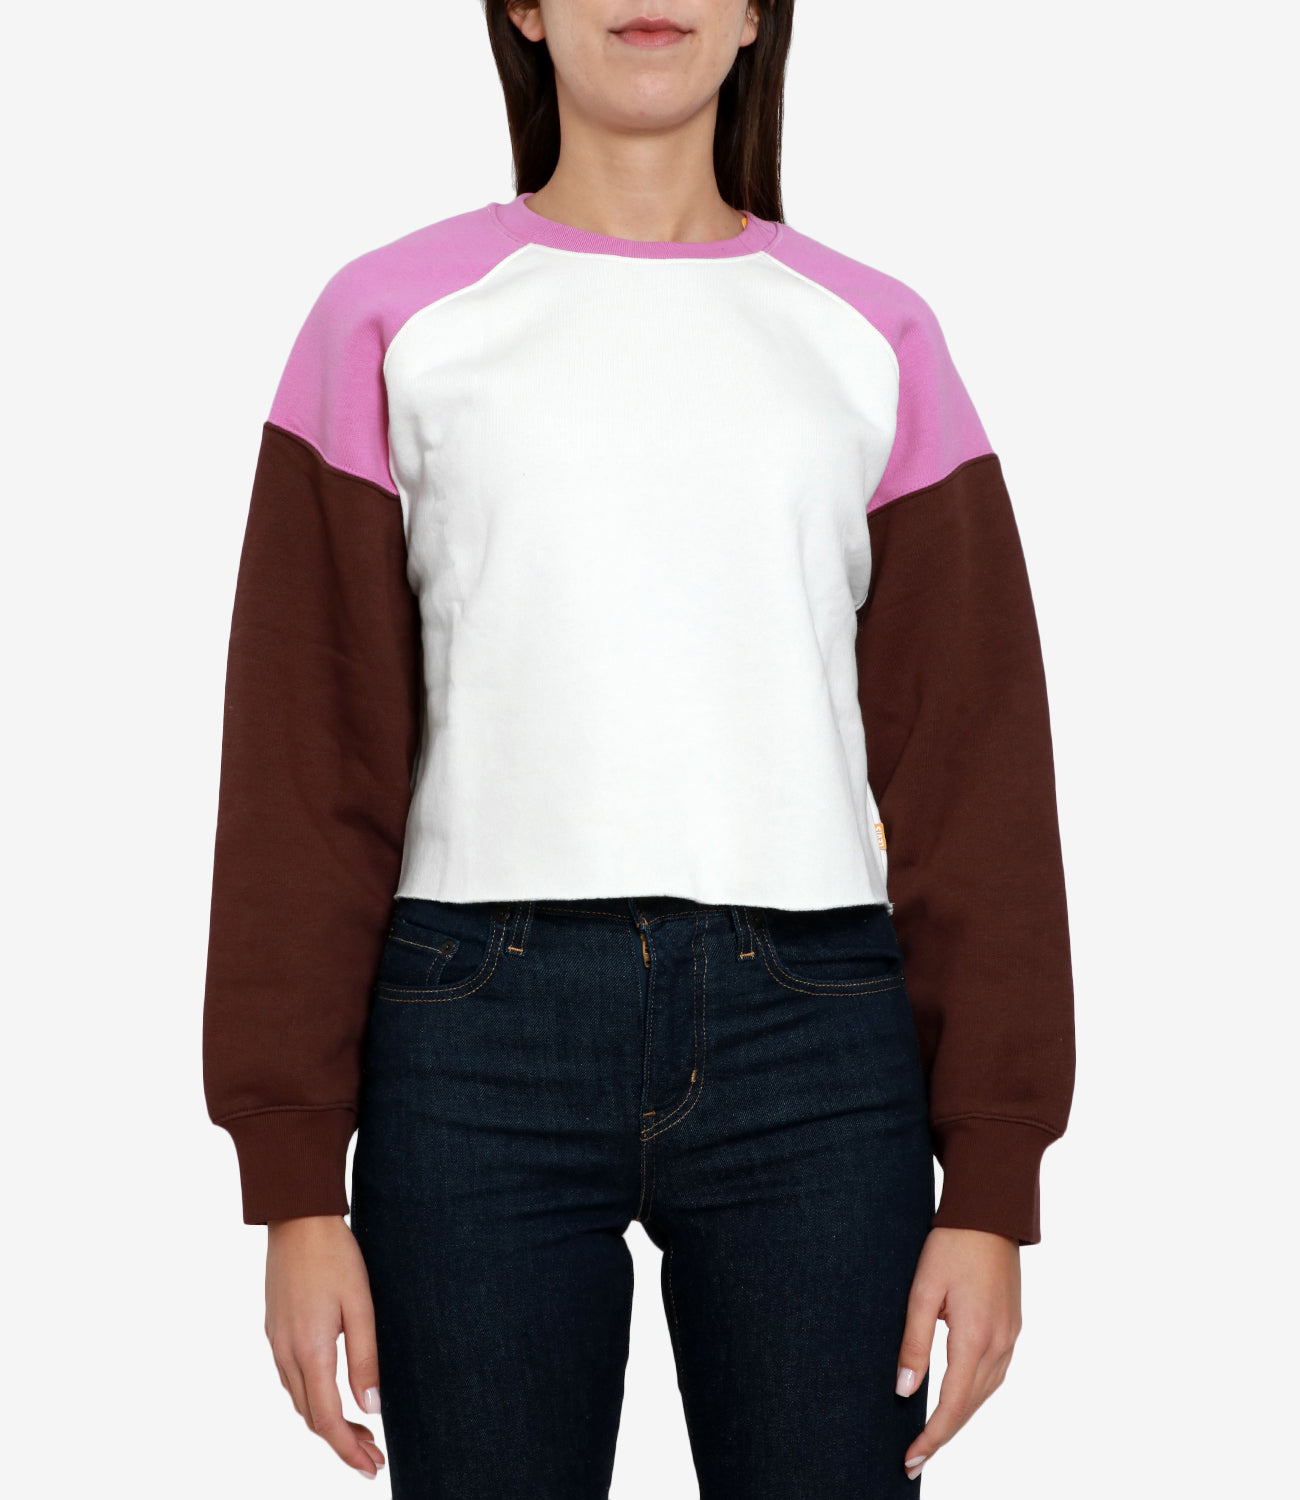 Levis | Gt Campout Sweatshirt Pink and White